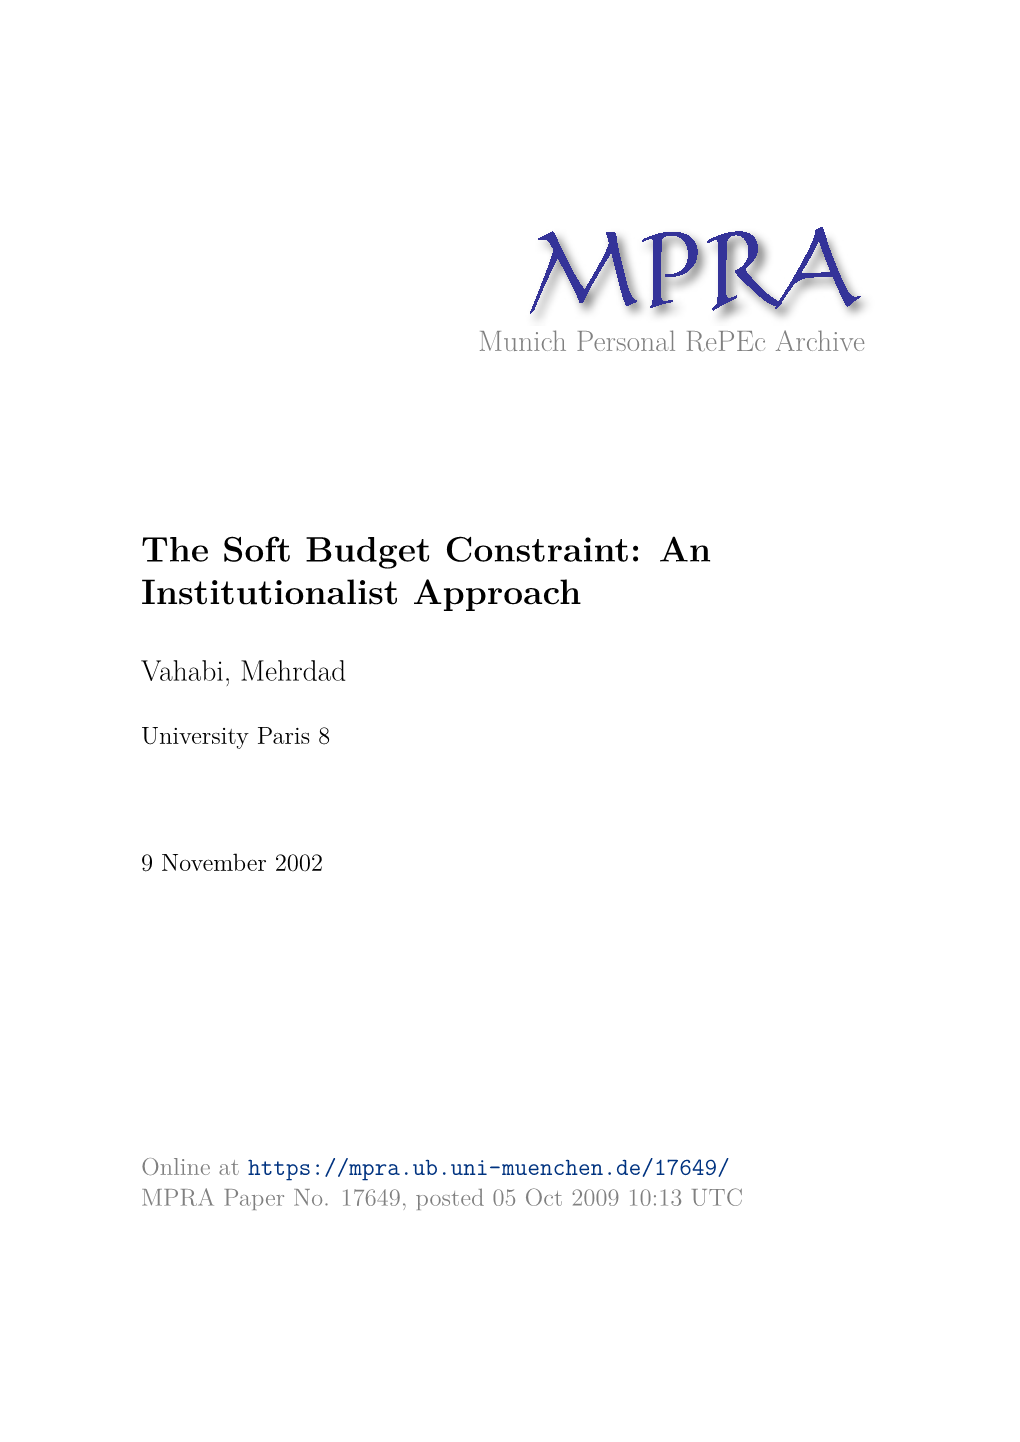 The Soft Budget Constraint: an Institutionalist Approach